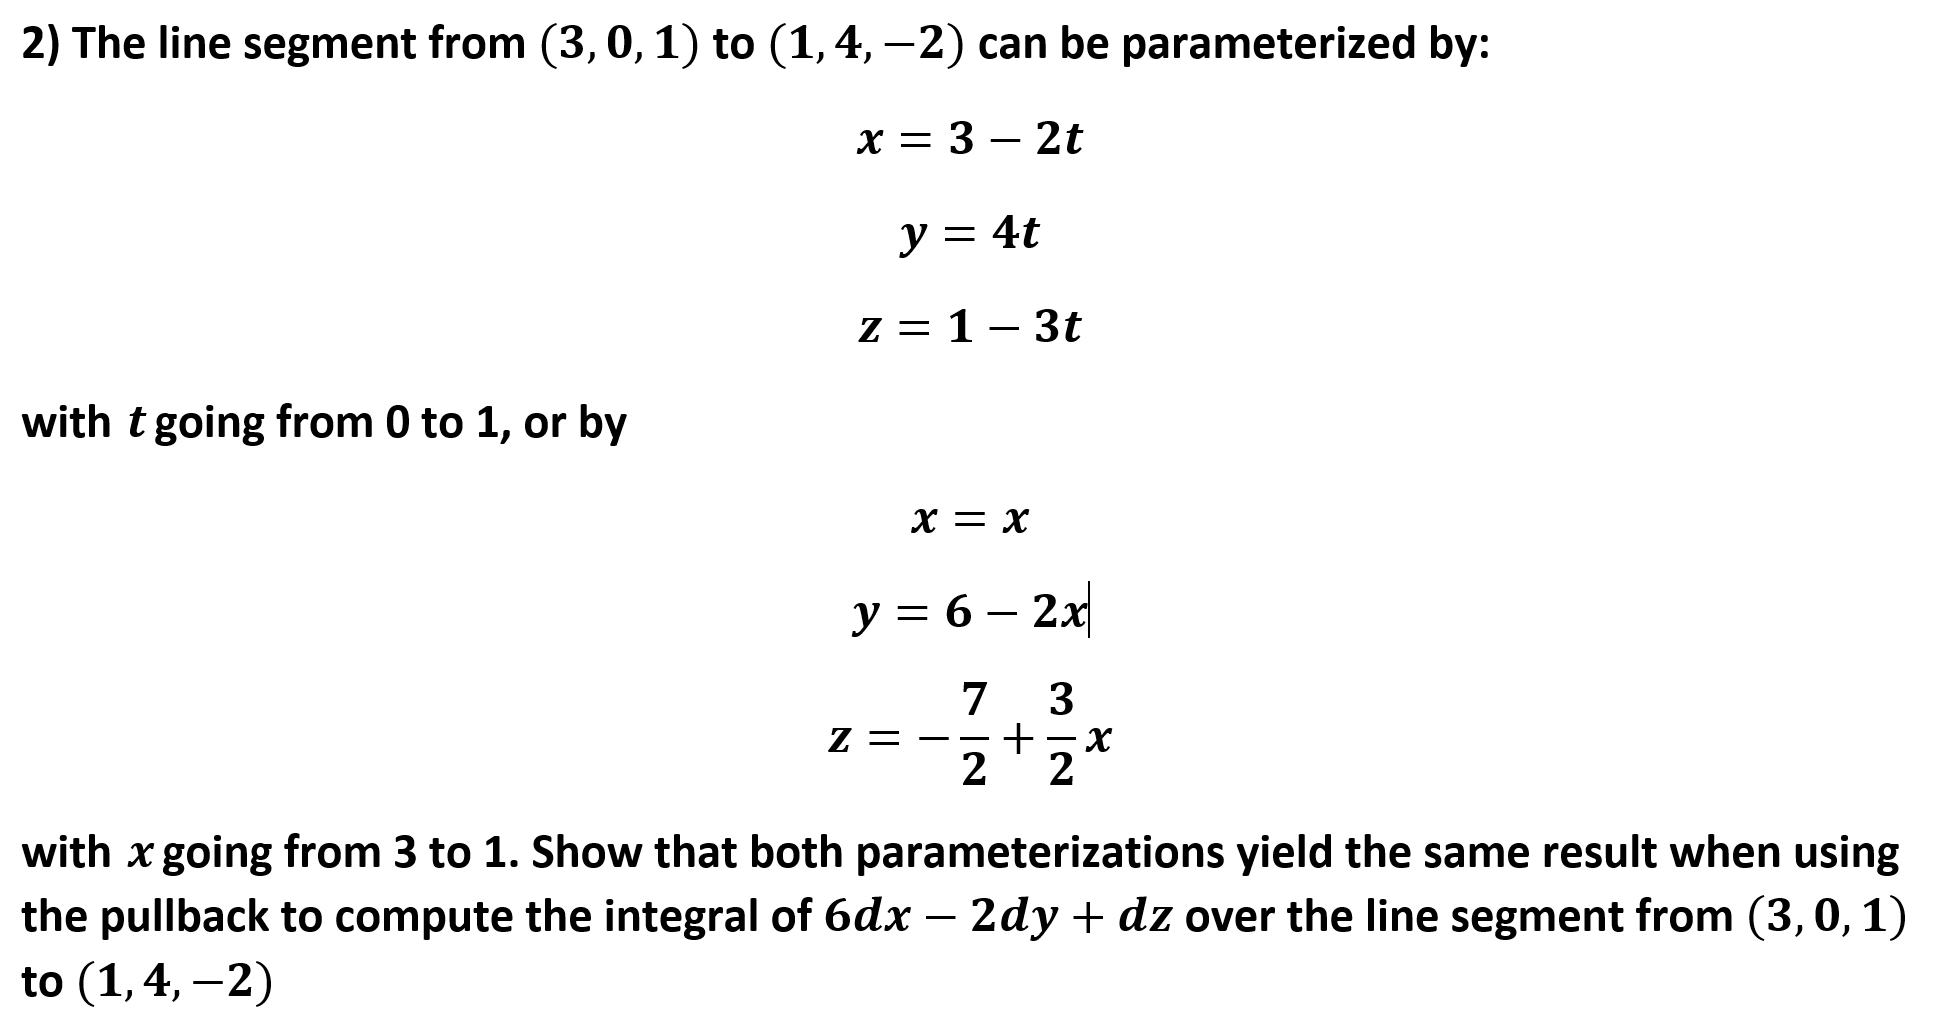 2) The line segment from (3,0, 1) to (1,4,-2) can be parameterized by:
x 3 - 2t
y = 4t
-
Z= 1-3t
with t going from 0 to 1, or by
х— х
y = 6 2x
7
3
х
2
Z =
2
with x going from 3 to 1. Show that both parameterizations yield the same result when using
the pullback to compute the integral of 6dx - 2dy + dz over the line segment from (3,0,1)
to (1,4,-2)
